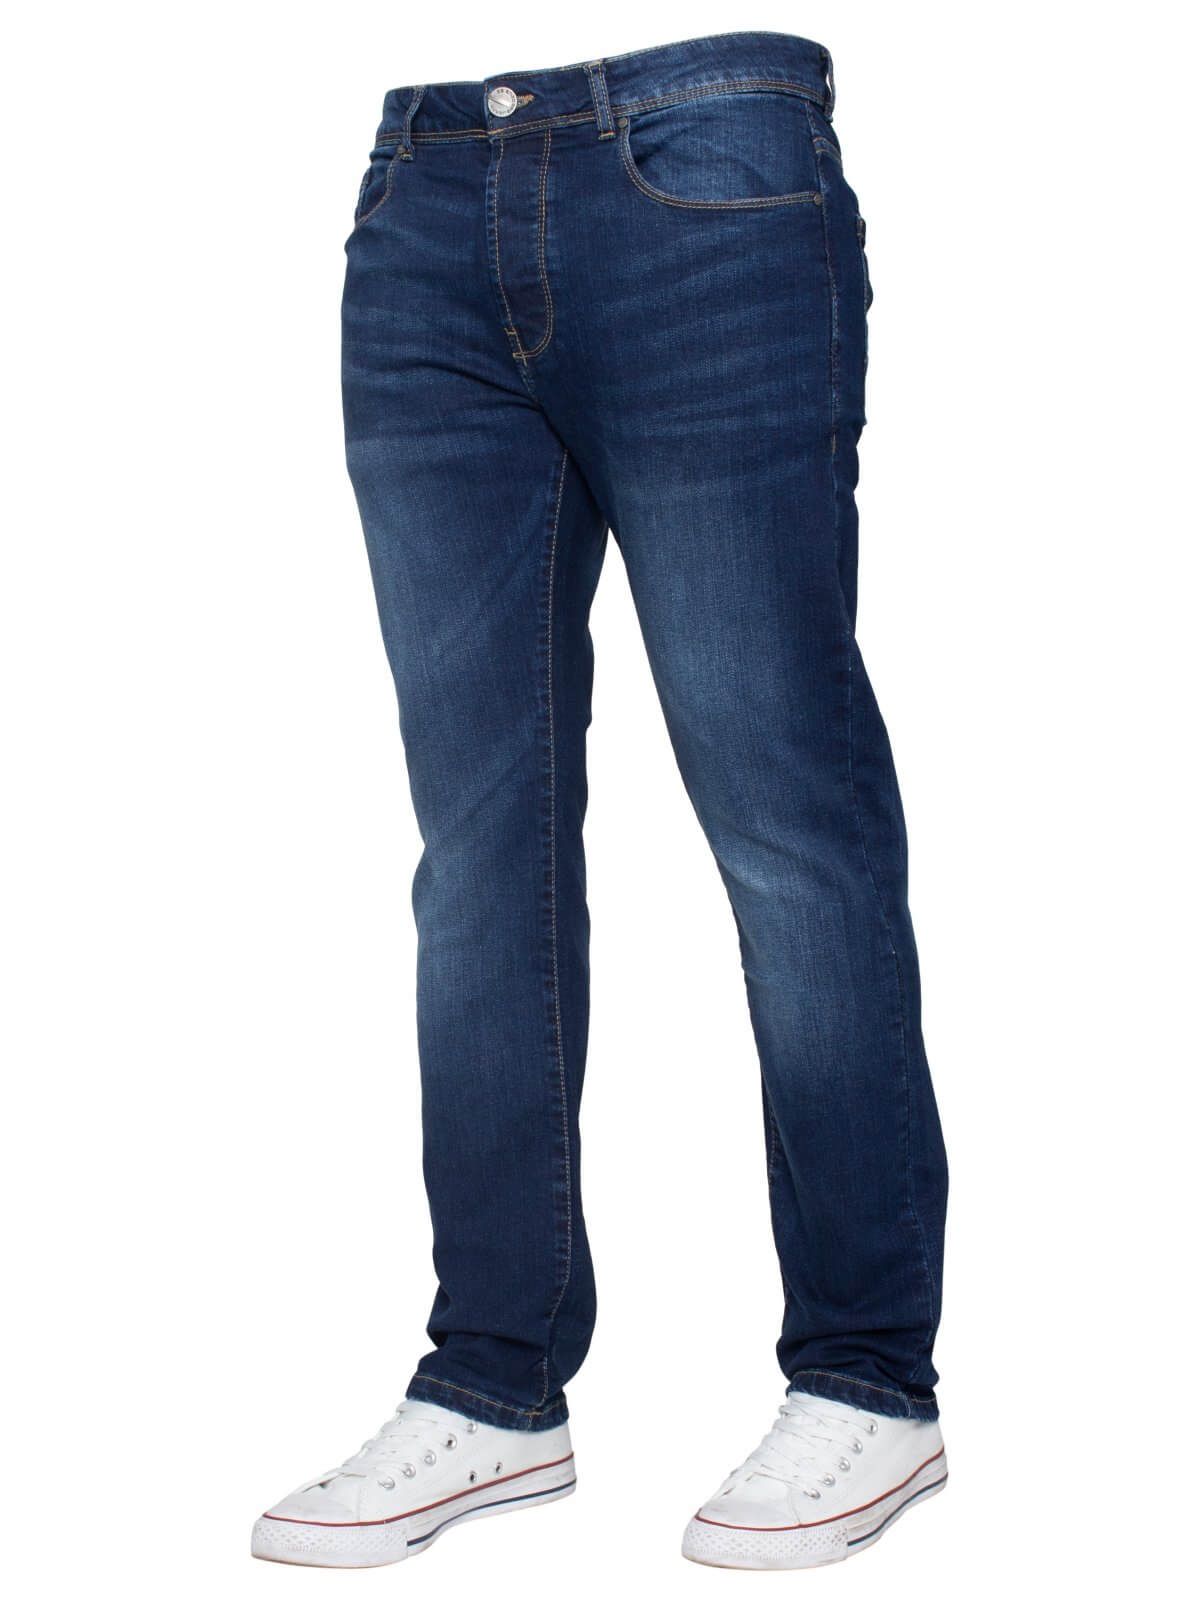 Update your blue denim collection with these skinny fit men s designer jeans by Enzo, tailored in soft cotton blend with a hint of stretch that combines a streamlined silhouette with comfort and freedom of movement. This button fly style features 5 pockets, a coin pocket, a branded PU waist tag and branded rivets and buttons. With a wide range of sizes up to waist 42 at the fashion website, everyone can find the perfect pair.